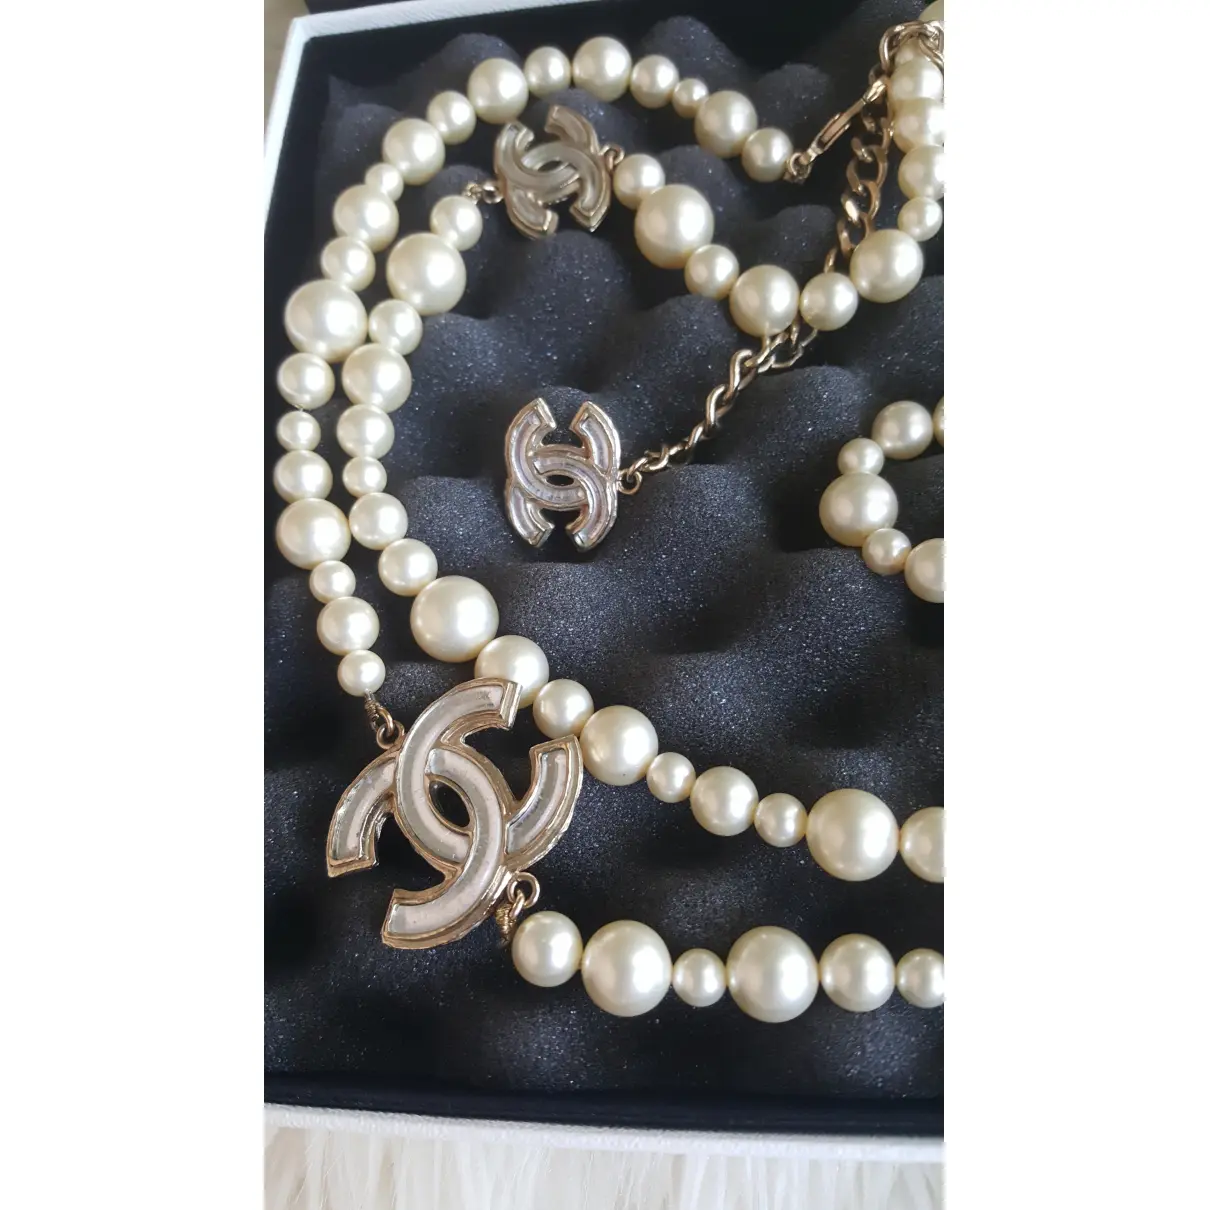 Buy Chanel CC long necklace online